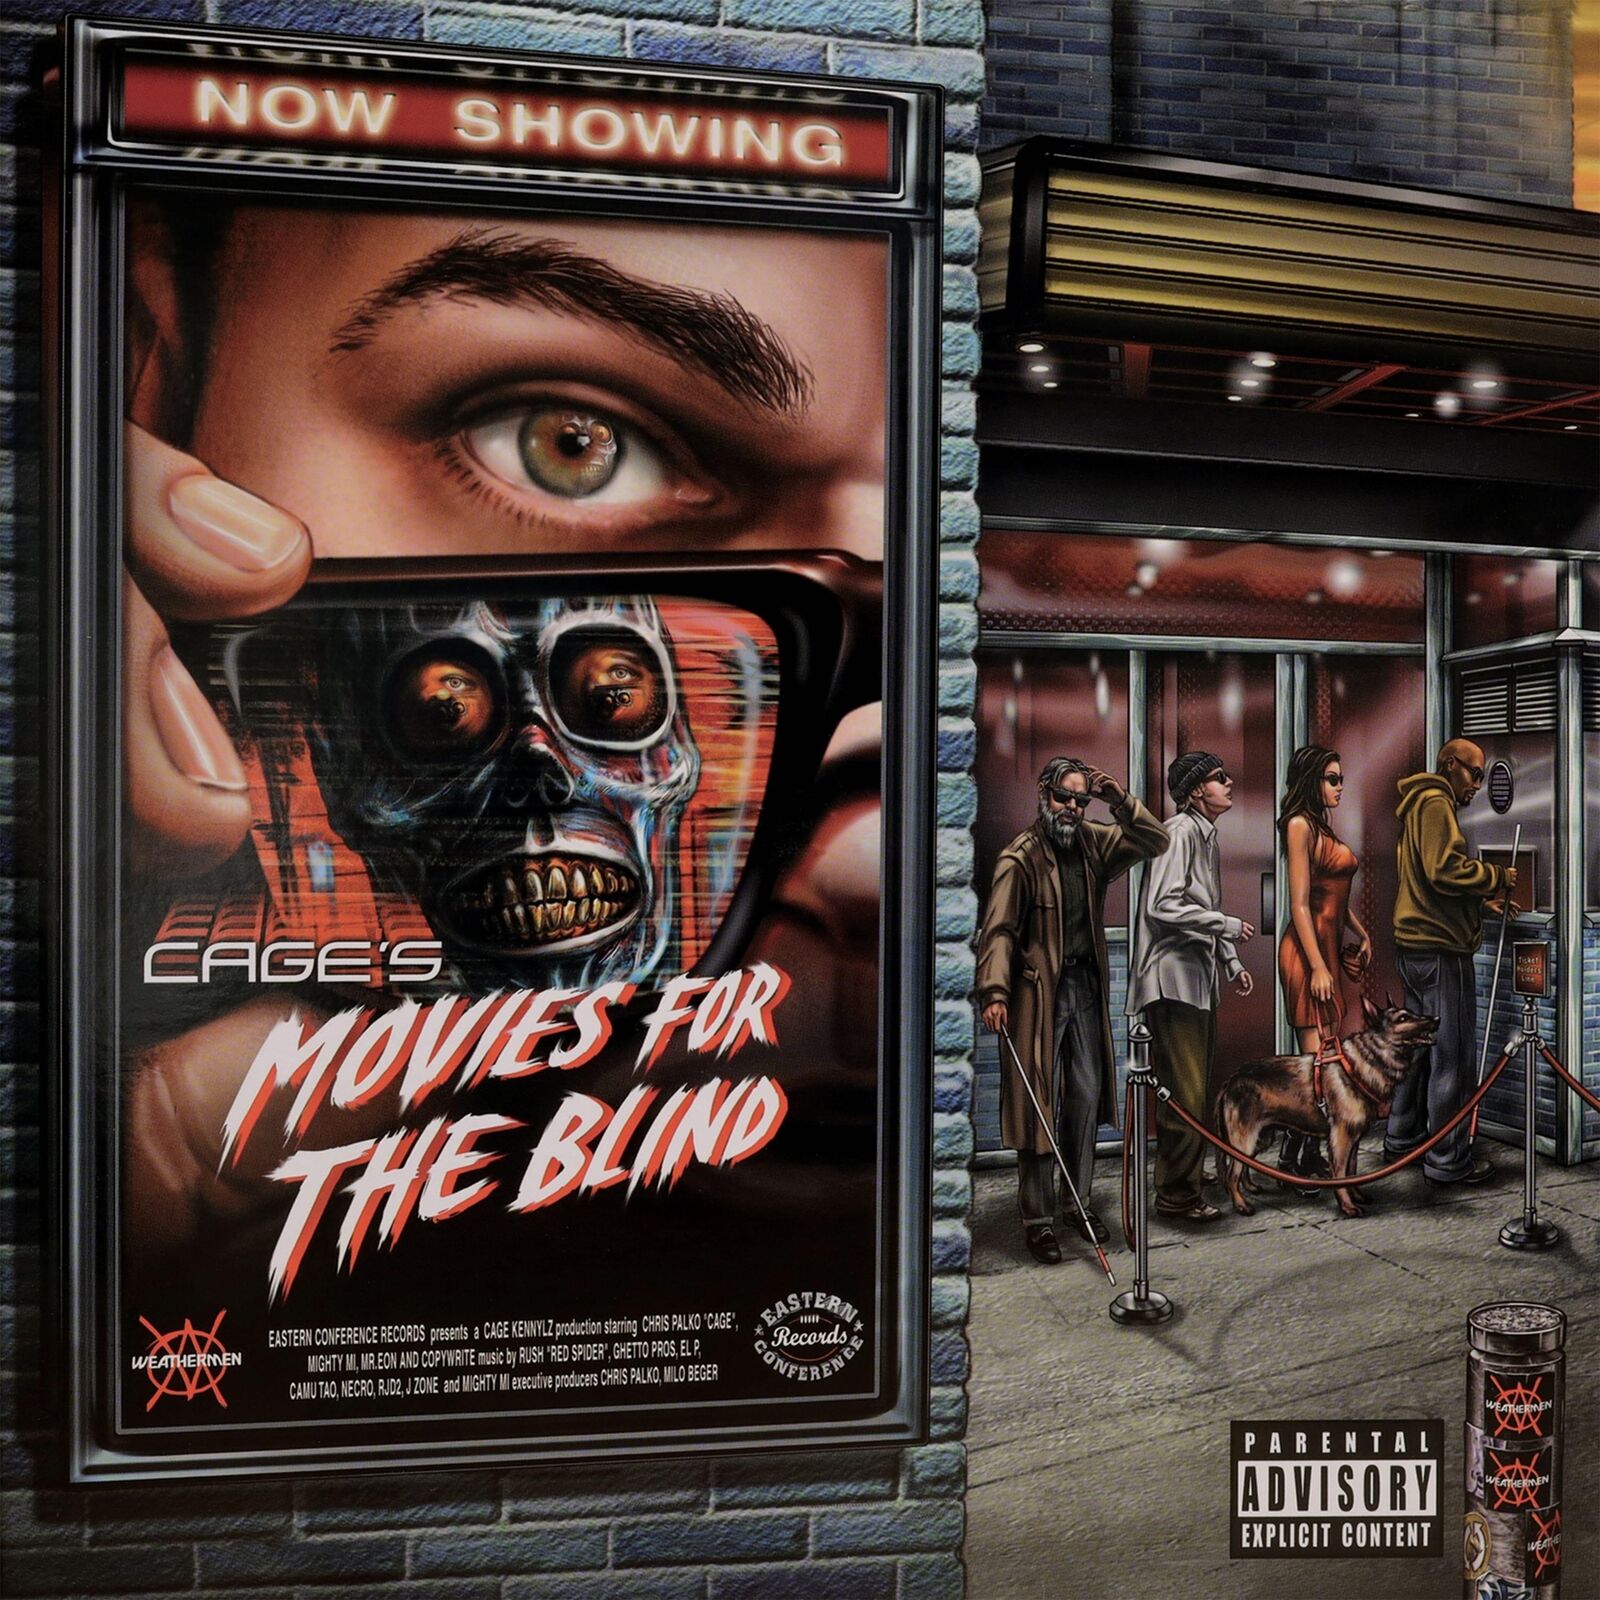 Cage Movies for the Blind (Vinyl) 12